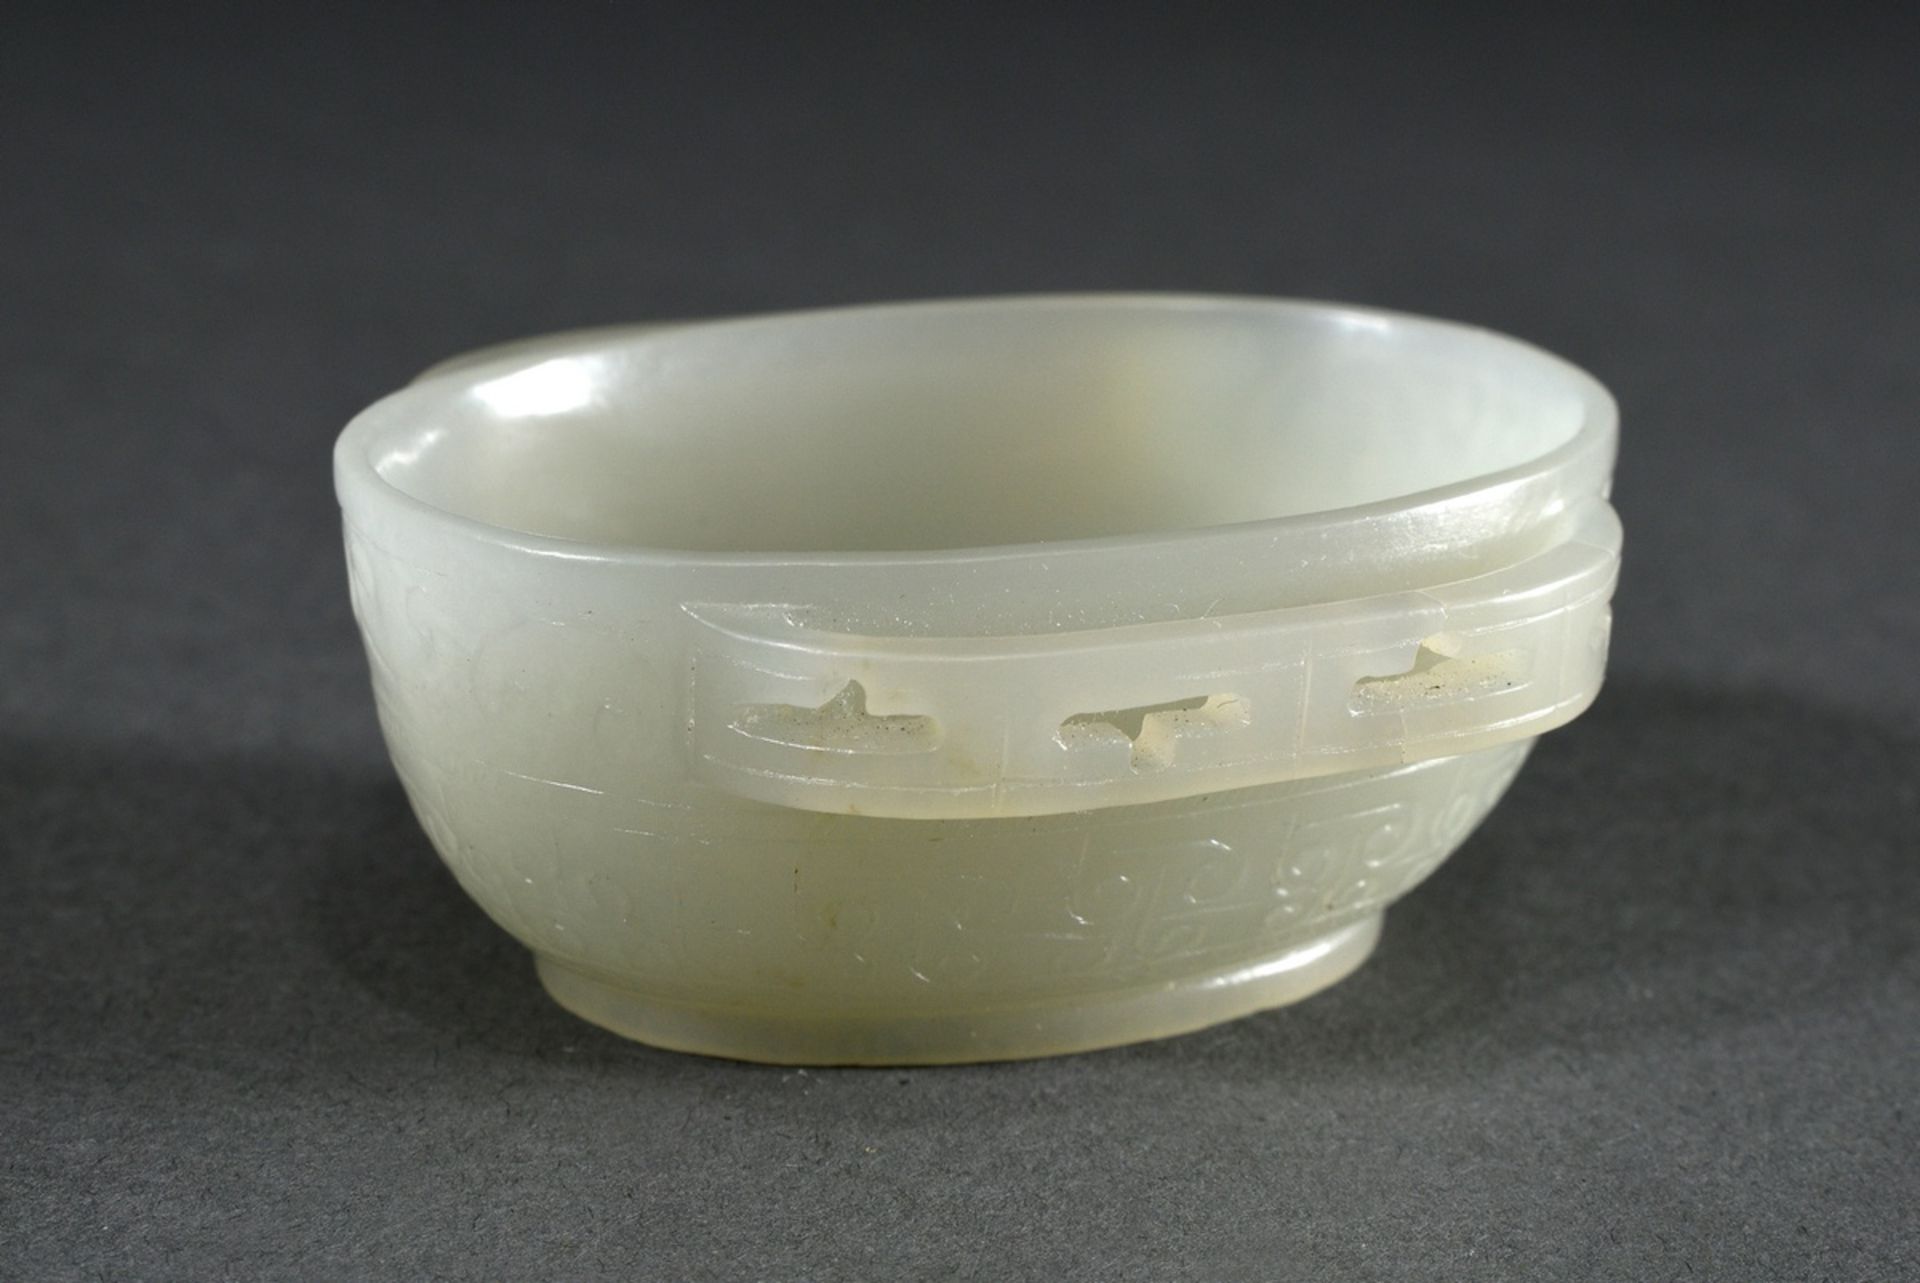 Seladon jade "ear bowl" in Han style with openwork handles and cut relief decoration in archaic sty